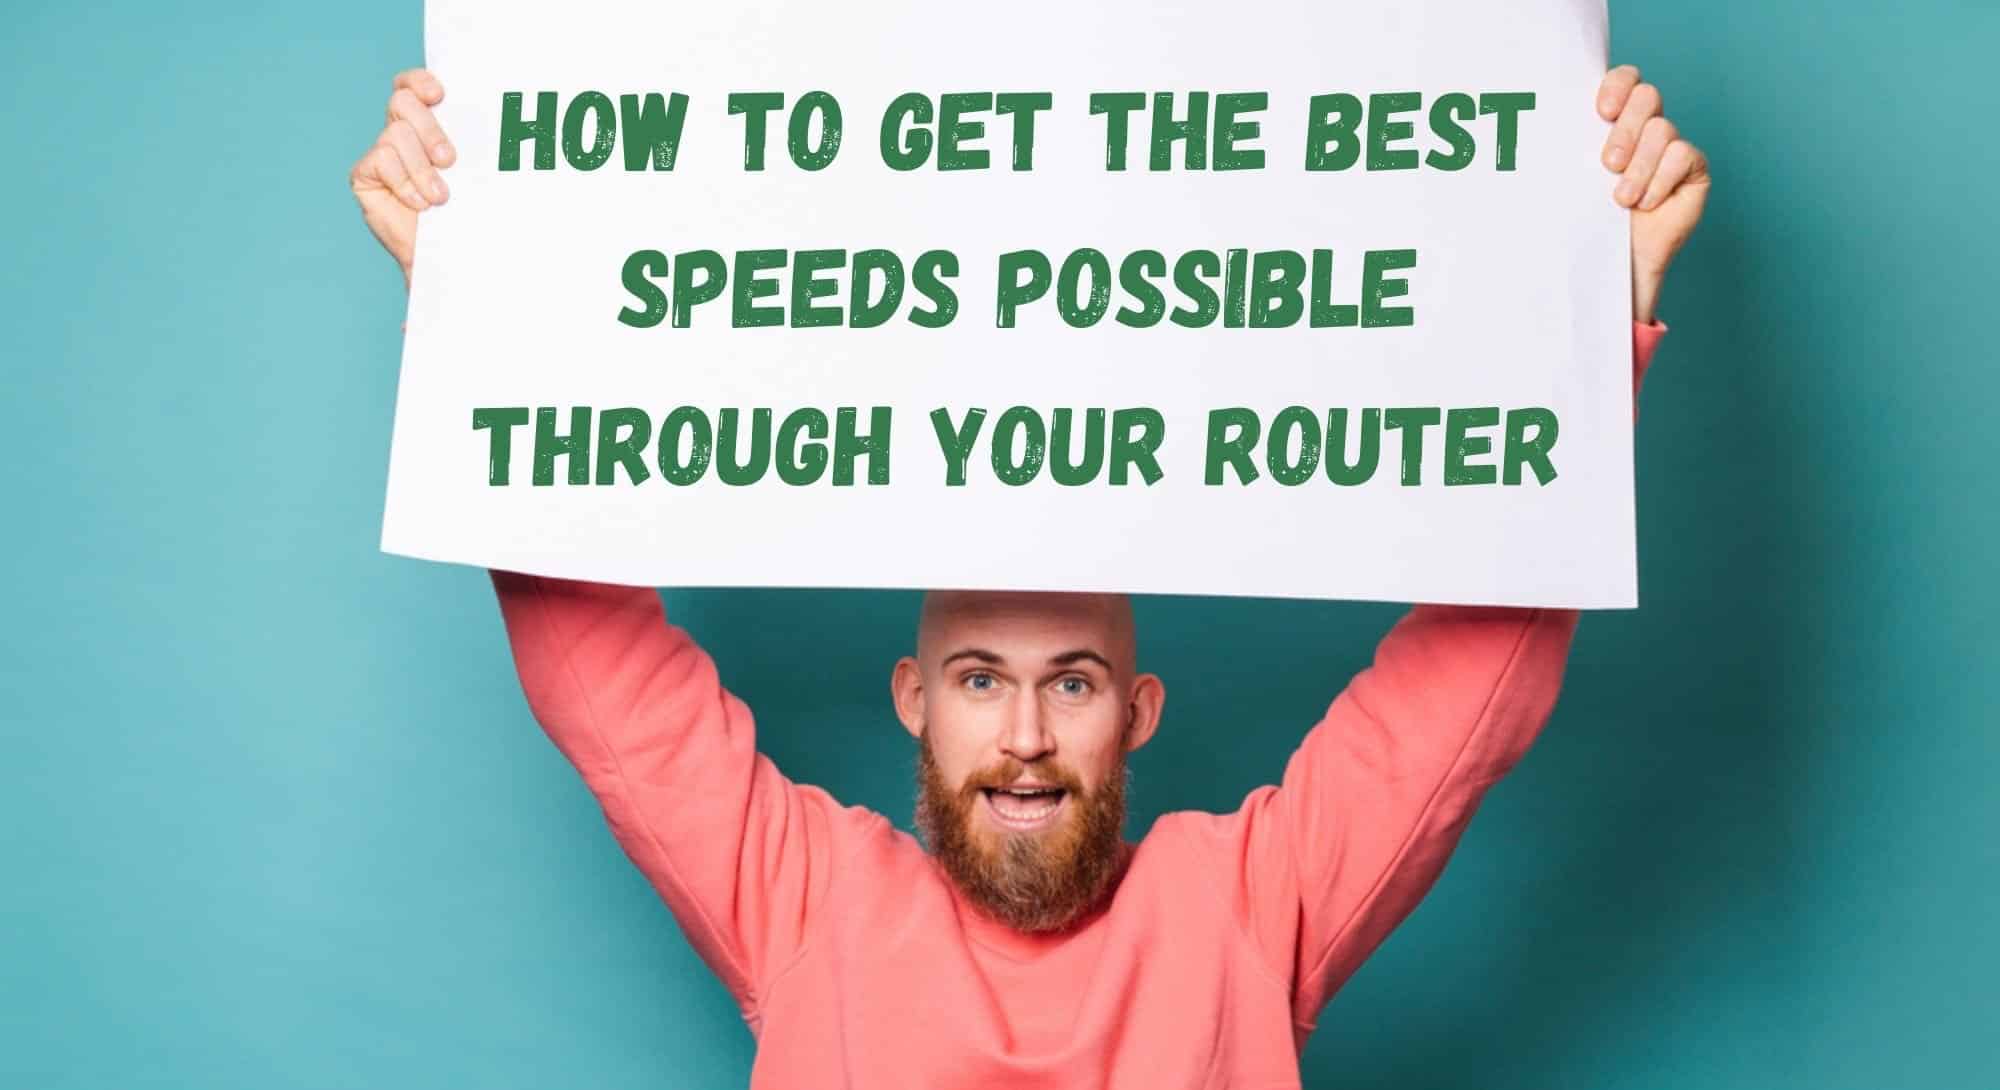 How to Get the Best Speeds Possible through your Router